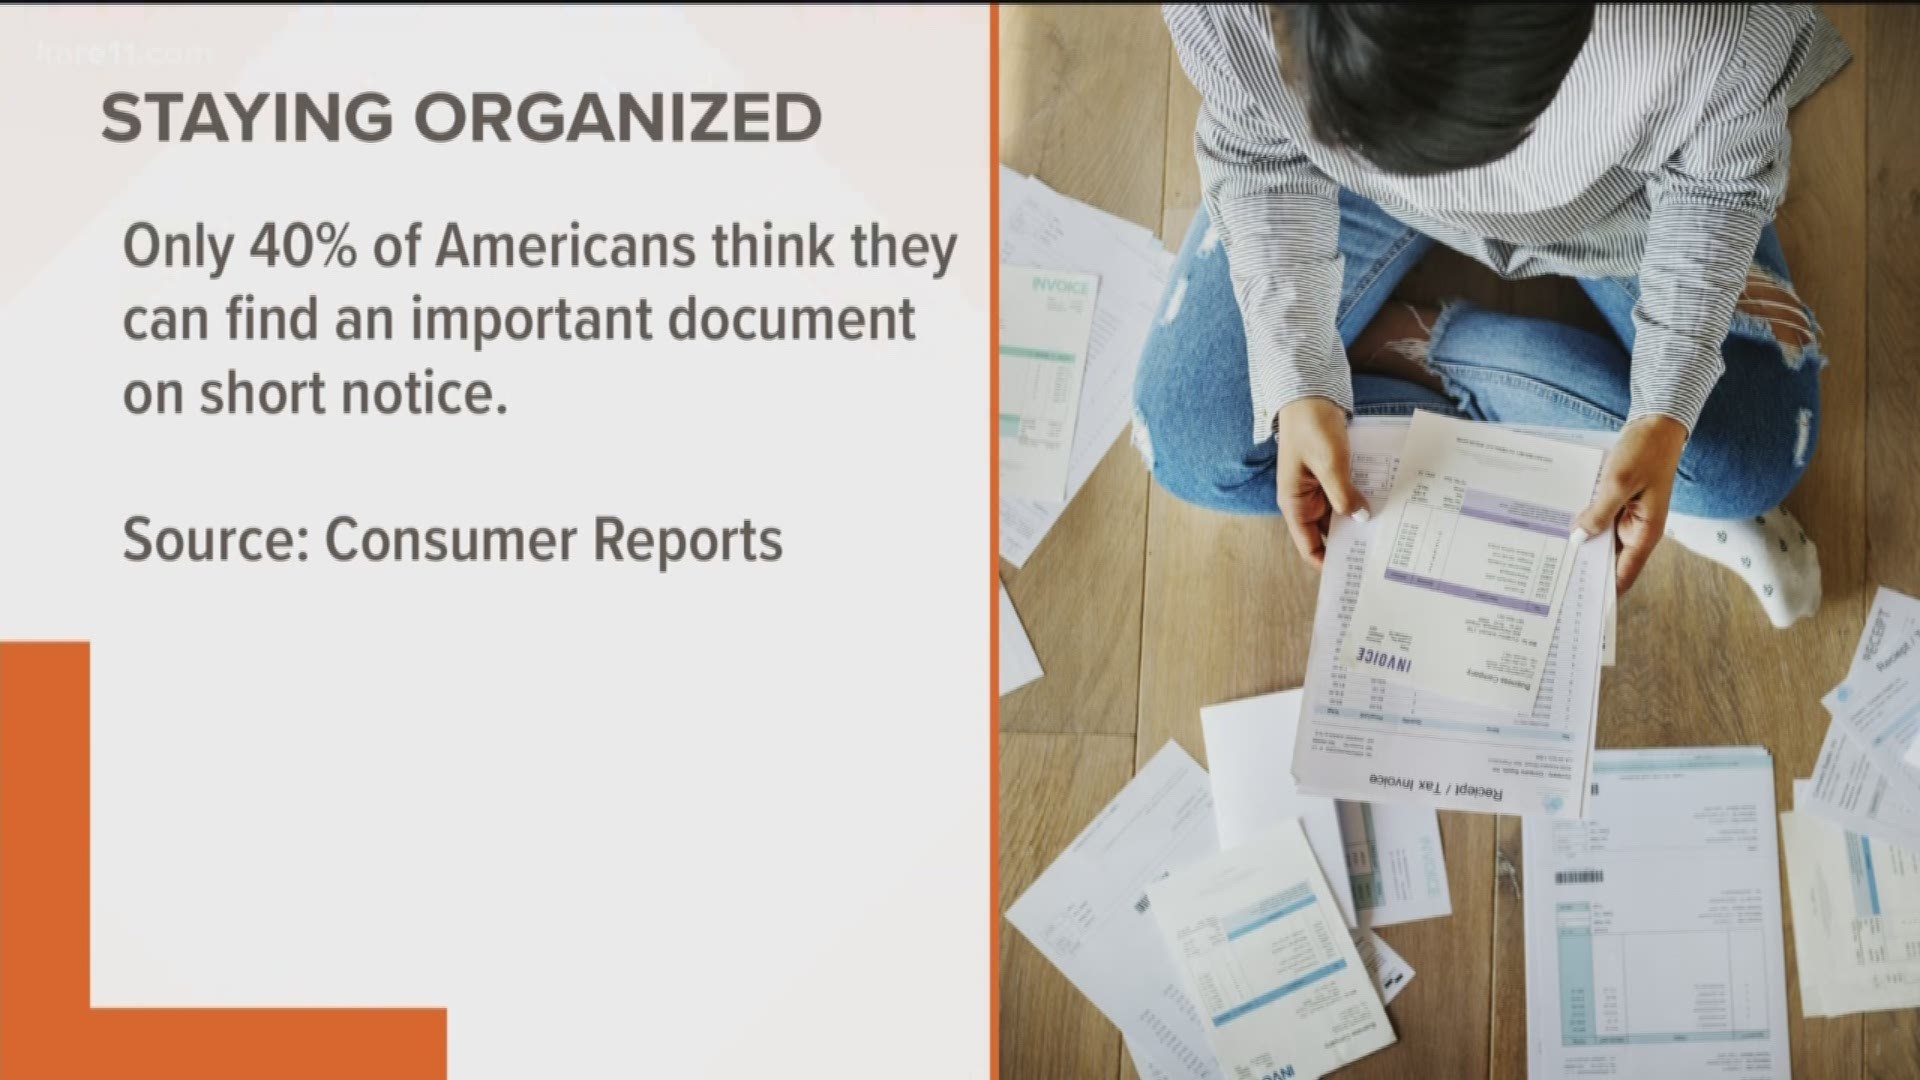 There are many good reasons to have a plan for organizing and retaining important documents. https://kare11.tv/2QRMOf5